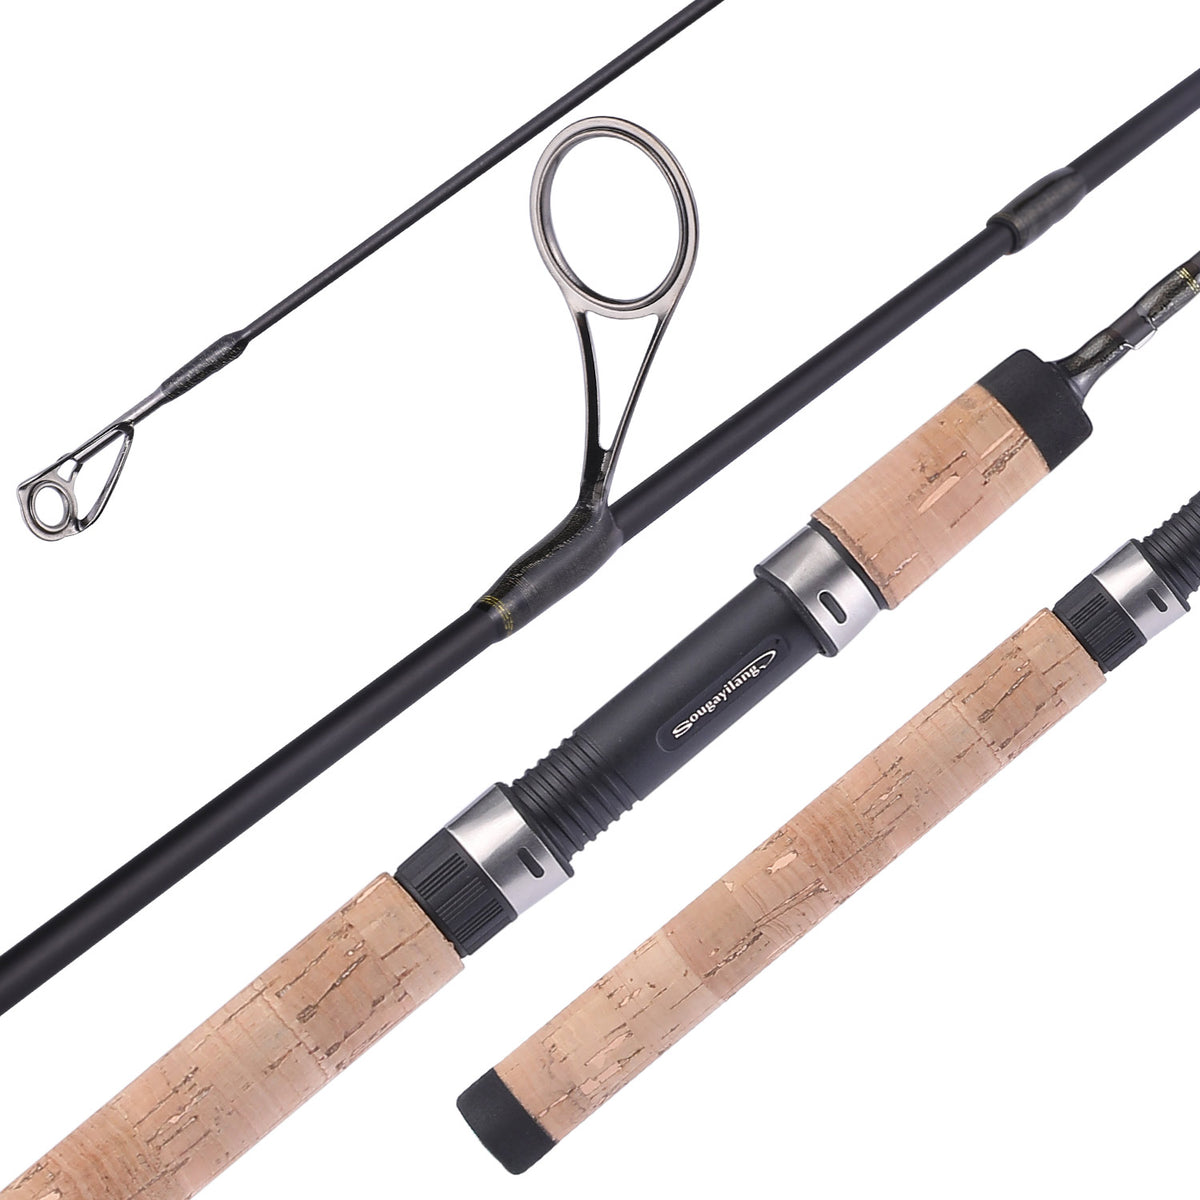 Rdeghly Ultralight Fishing Pole, /Straight Handle Horse Mouth Rod, Pool Sea Fishing For Stream Wild Fishing 1.8 Meters